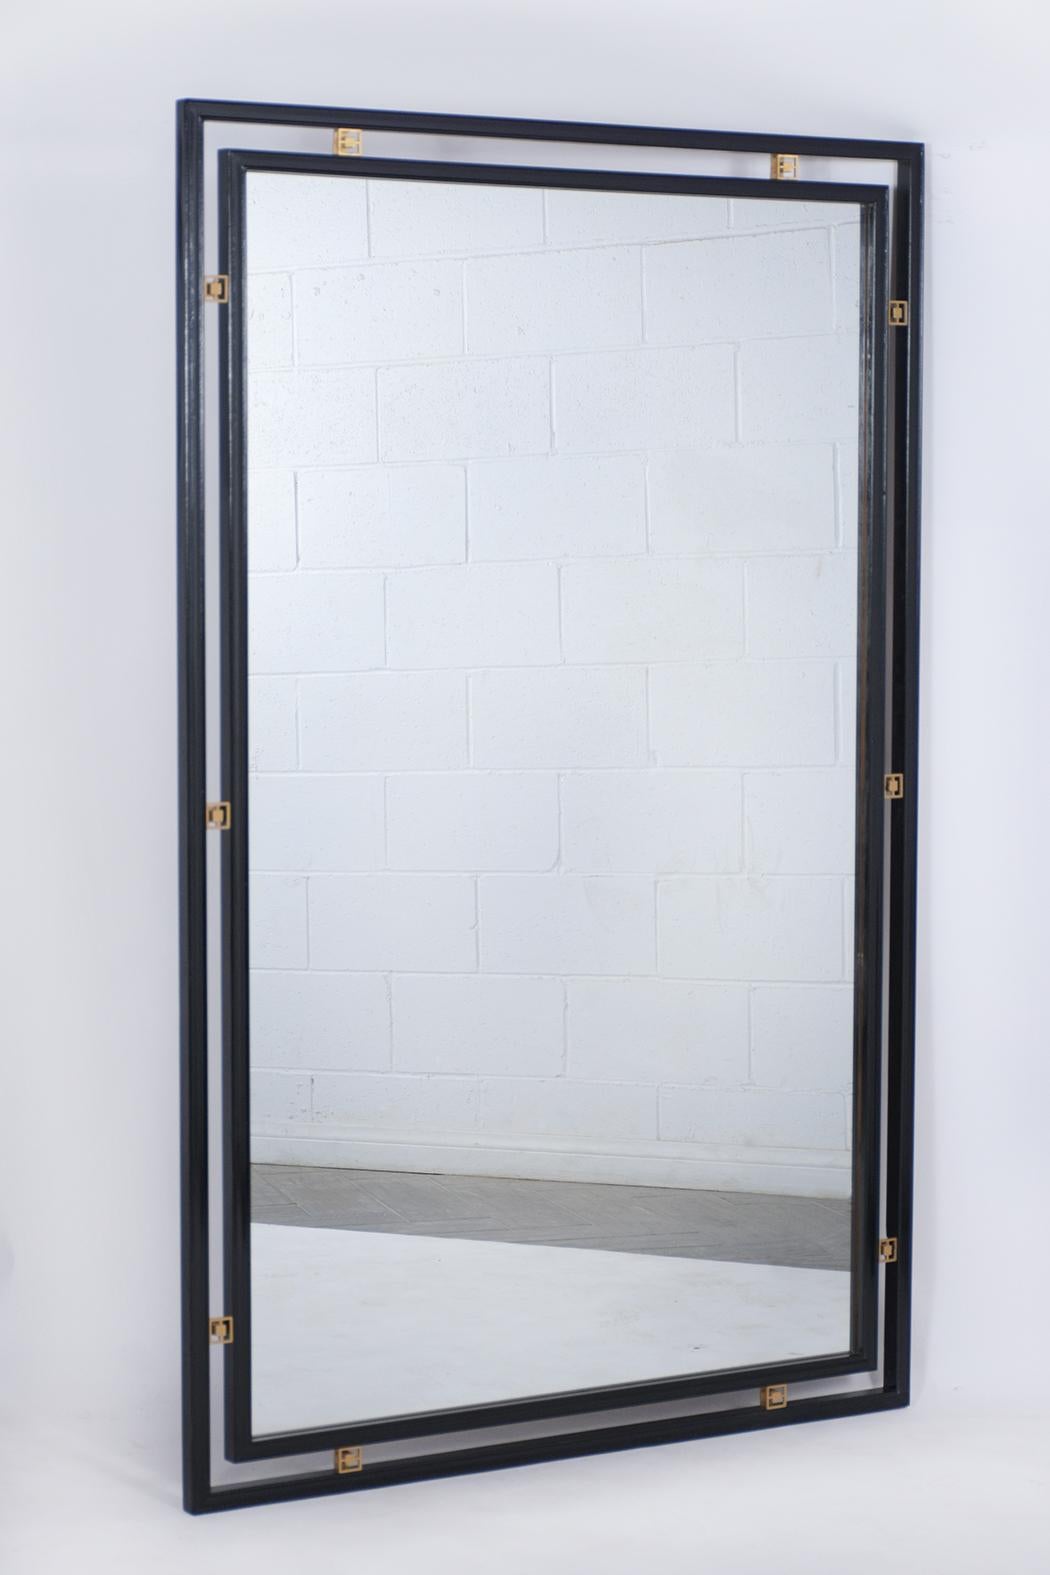 This vintage midcentury wall mirror is in great condition, comes with its original mirror glass that's fully reflective, has a new ebonized lacquered finish, and comes with decorative brass accents around the mirror. This 1960 ebonized floor mirror